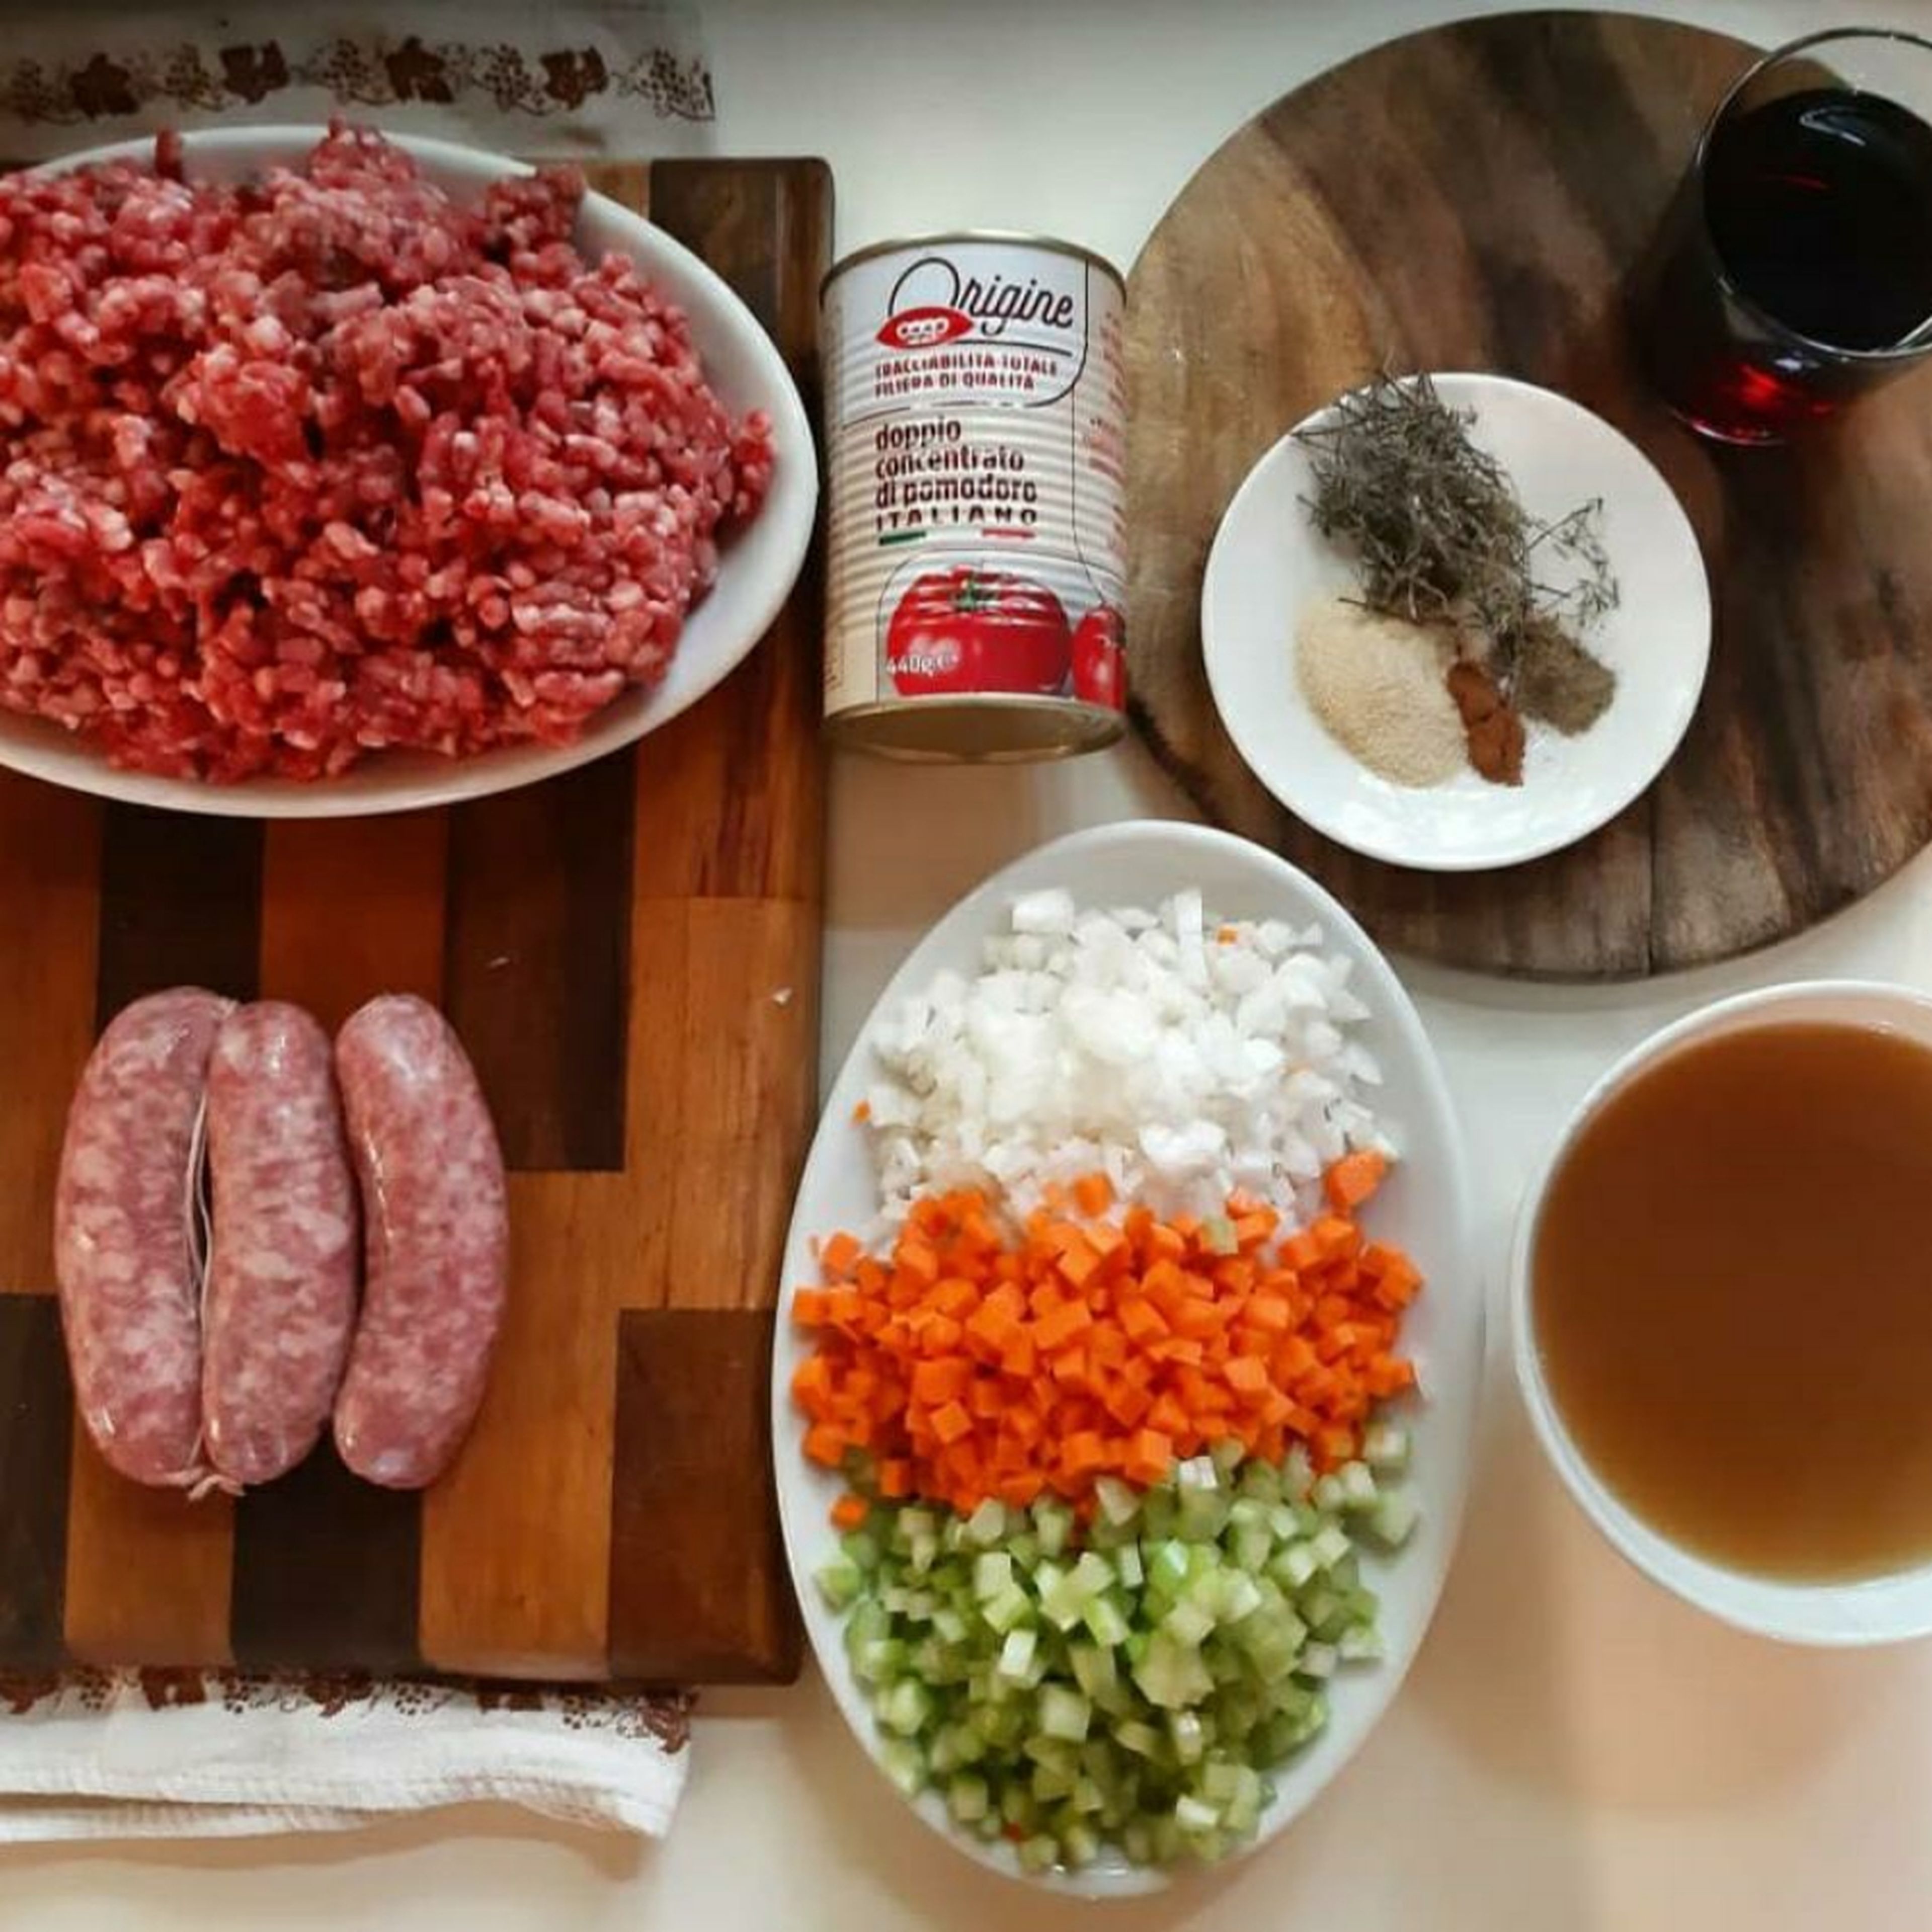 Prepare all the ingredients. Dice the vegetables, grate the garlic, prepare the spice mix, take the sausage mince out of the external membrane and chop it up.